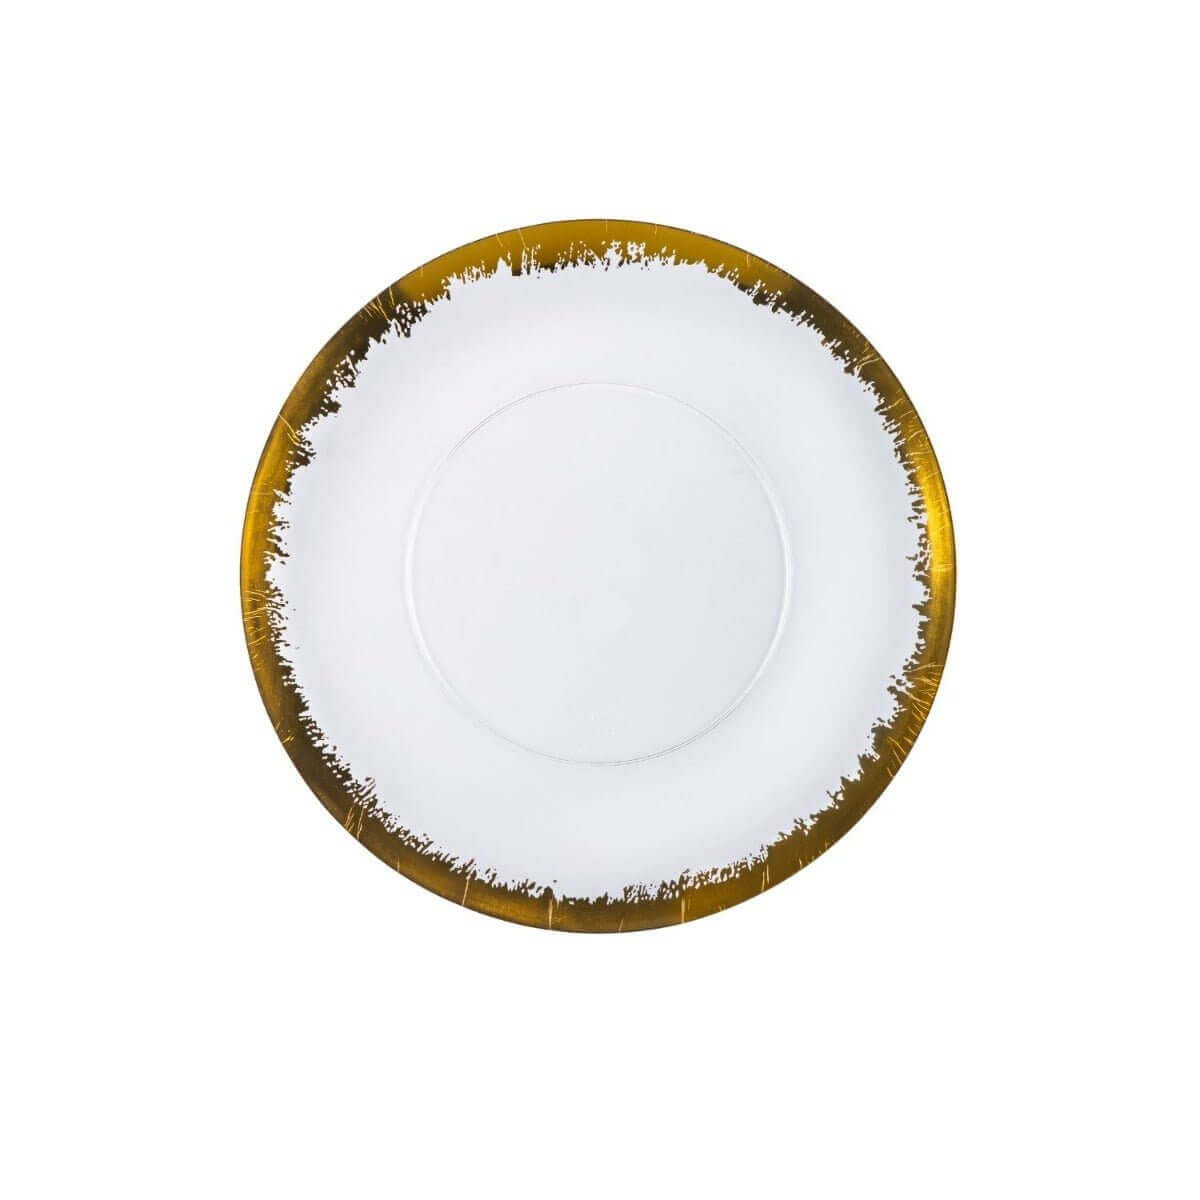 8" Gold Scratched Design Plastic Plates (120 Count) - Yom Tov Settings